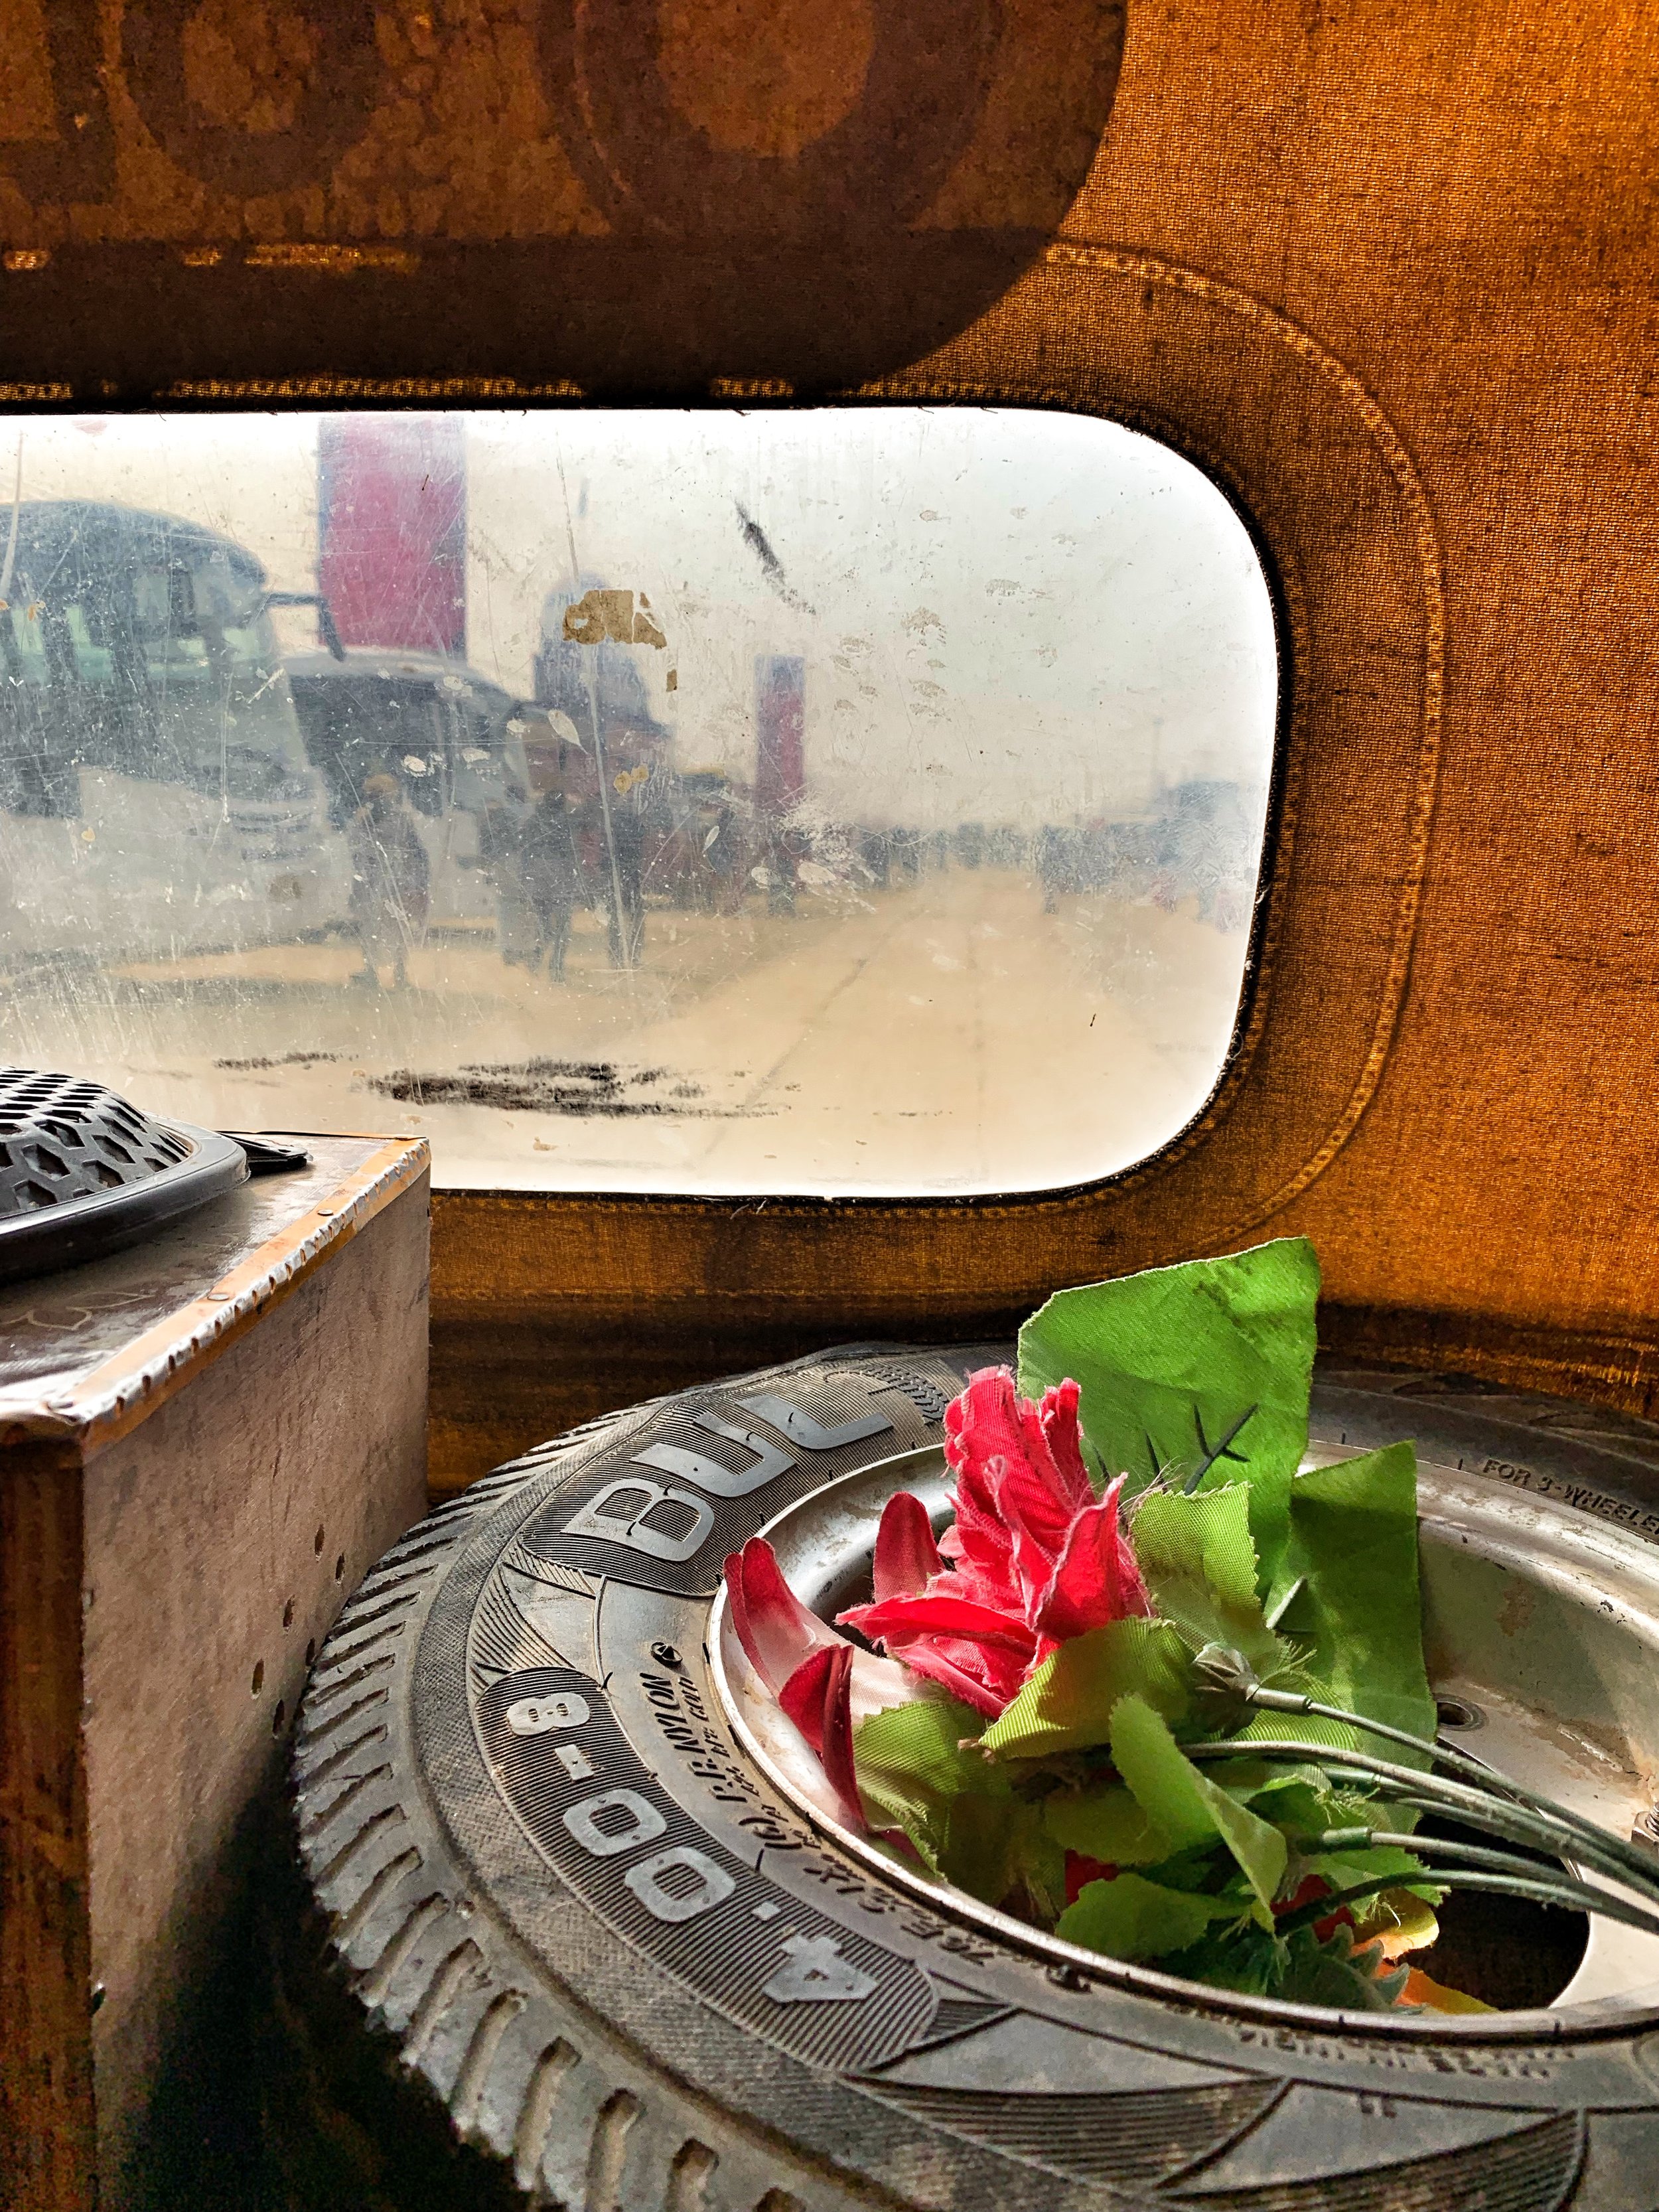  Flower perched on spare tire in the back of a tuk tuk. 